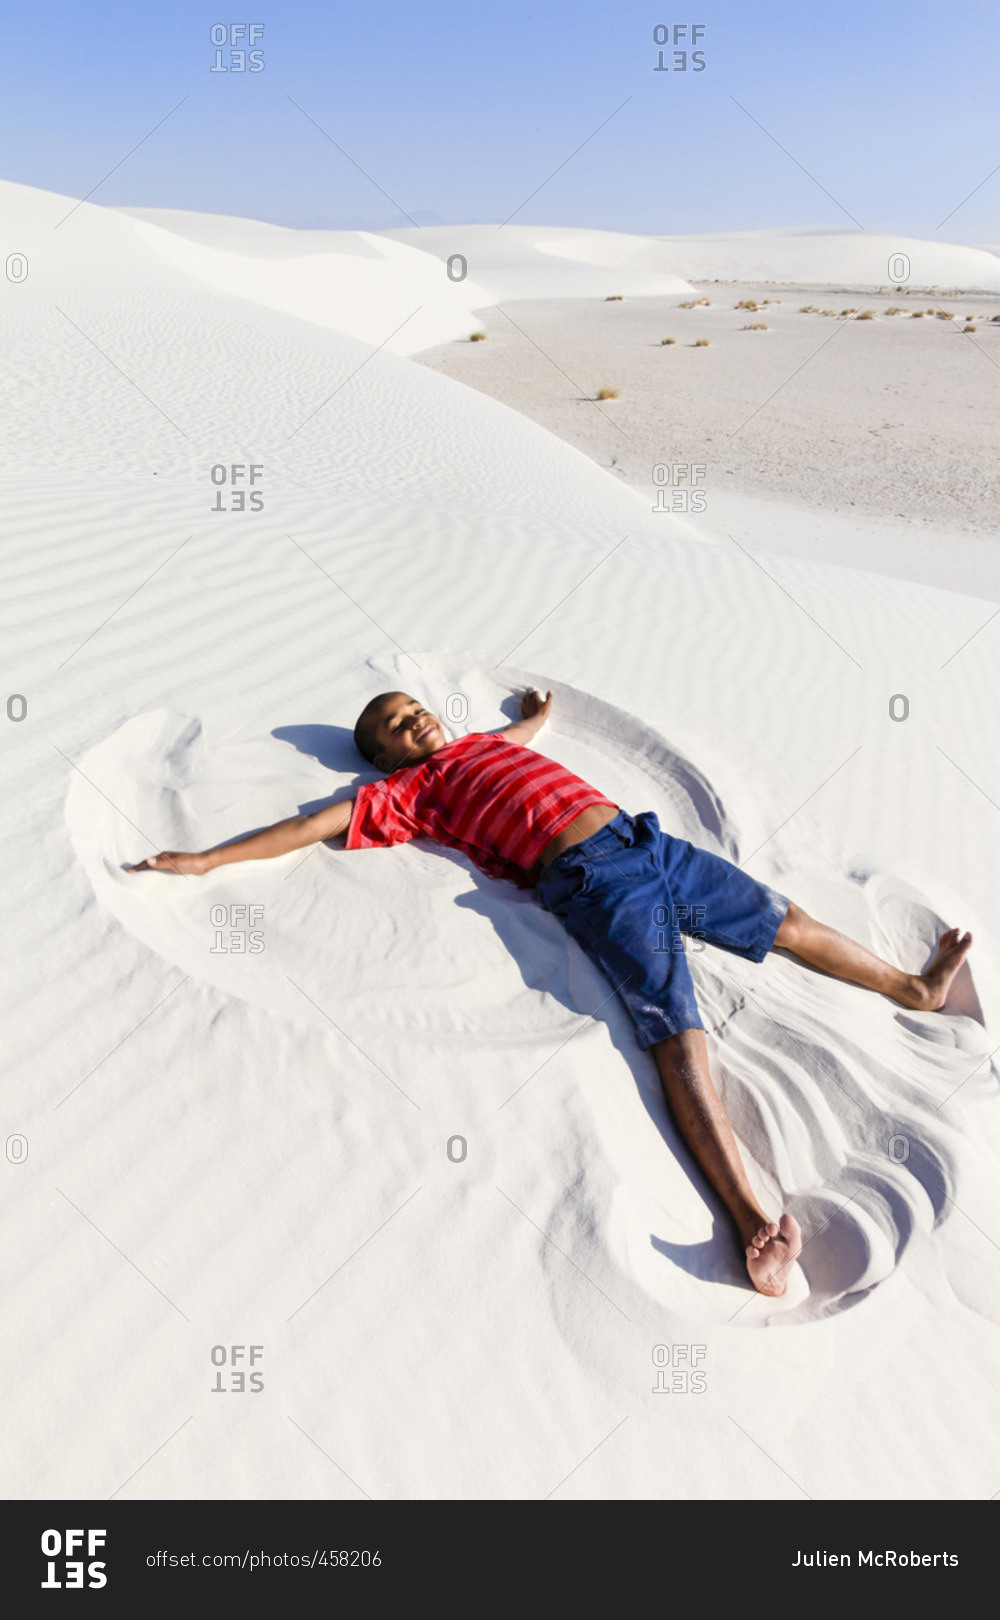 A young boy creating a 'sand angel' in the desert of the White Sands National Monument